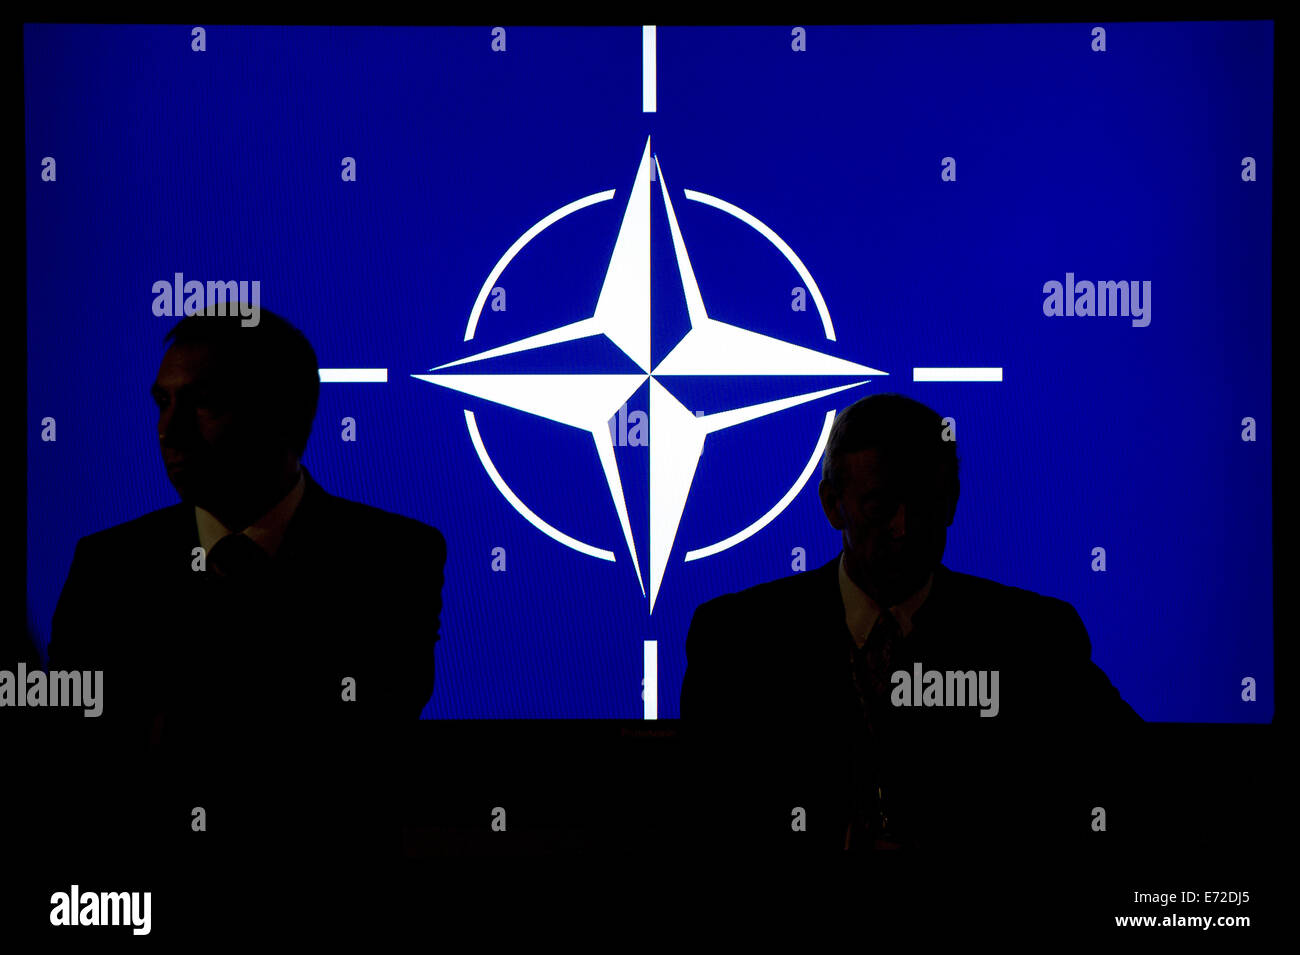 Newport, South Wales. 4th Sep, 2014. Participants sit in front of the Nato logo during the NATO summit in Newport, South Wales, 4 September 2014. World leaders from about 60 countries are coming together for a two-day NATO summit taking place from 04-05 September 2014. PHOTO: MAURIZIO GAMBARINI/dpa/Alamy Live News Stock Photo